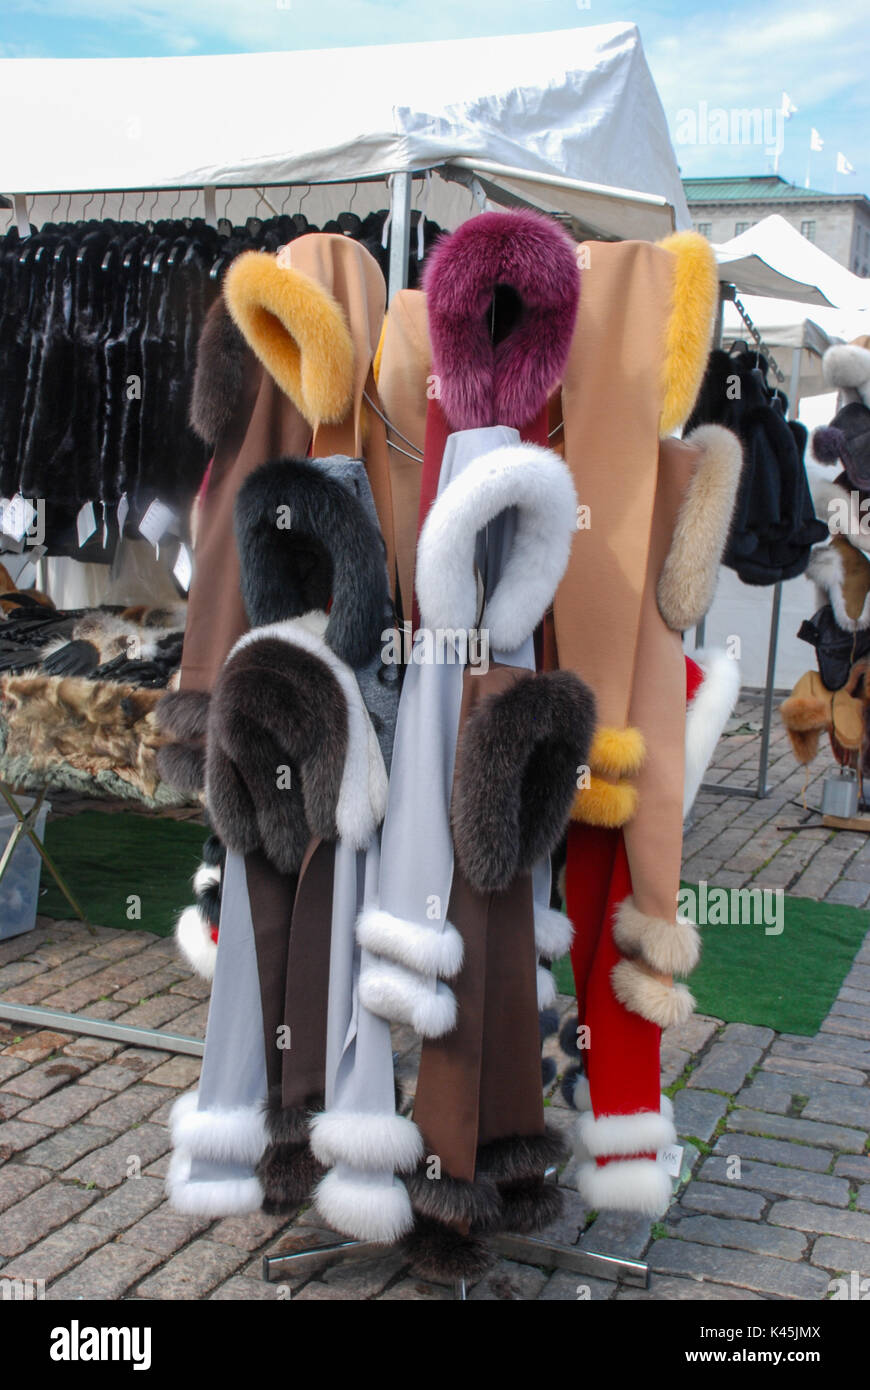 Open-air market stall in Helsinki, the capital city of Finland Stock Photo